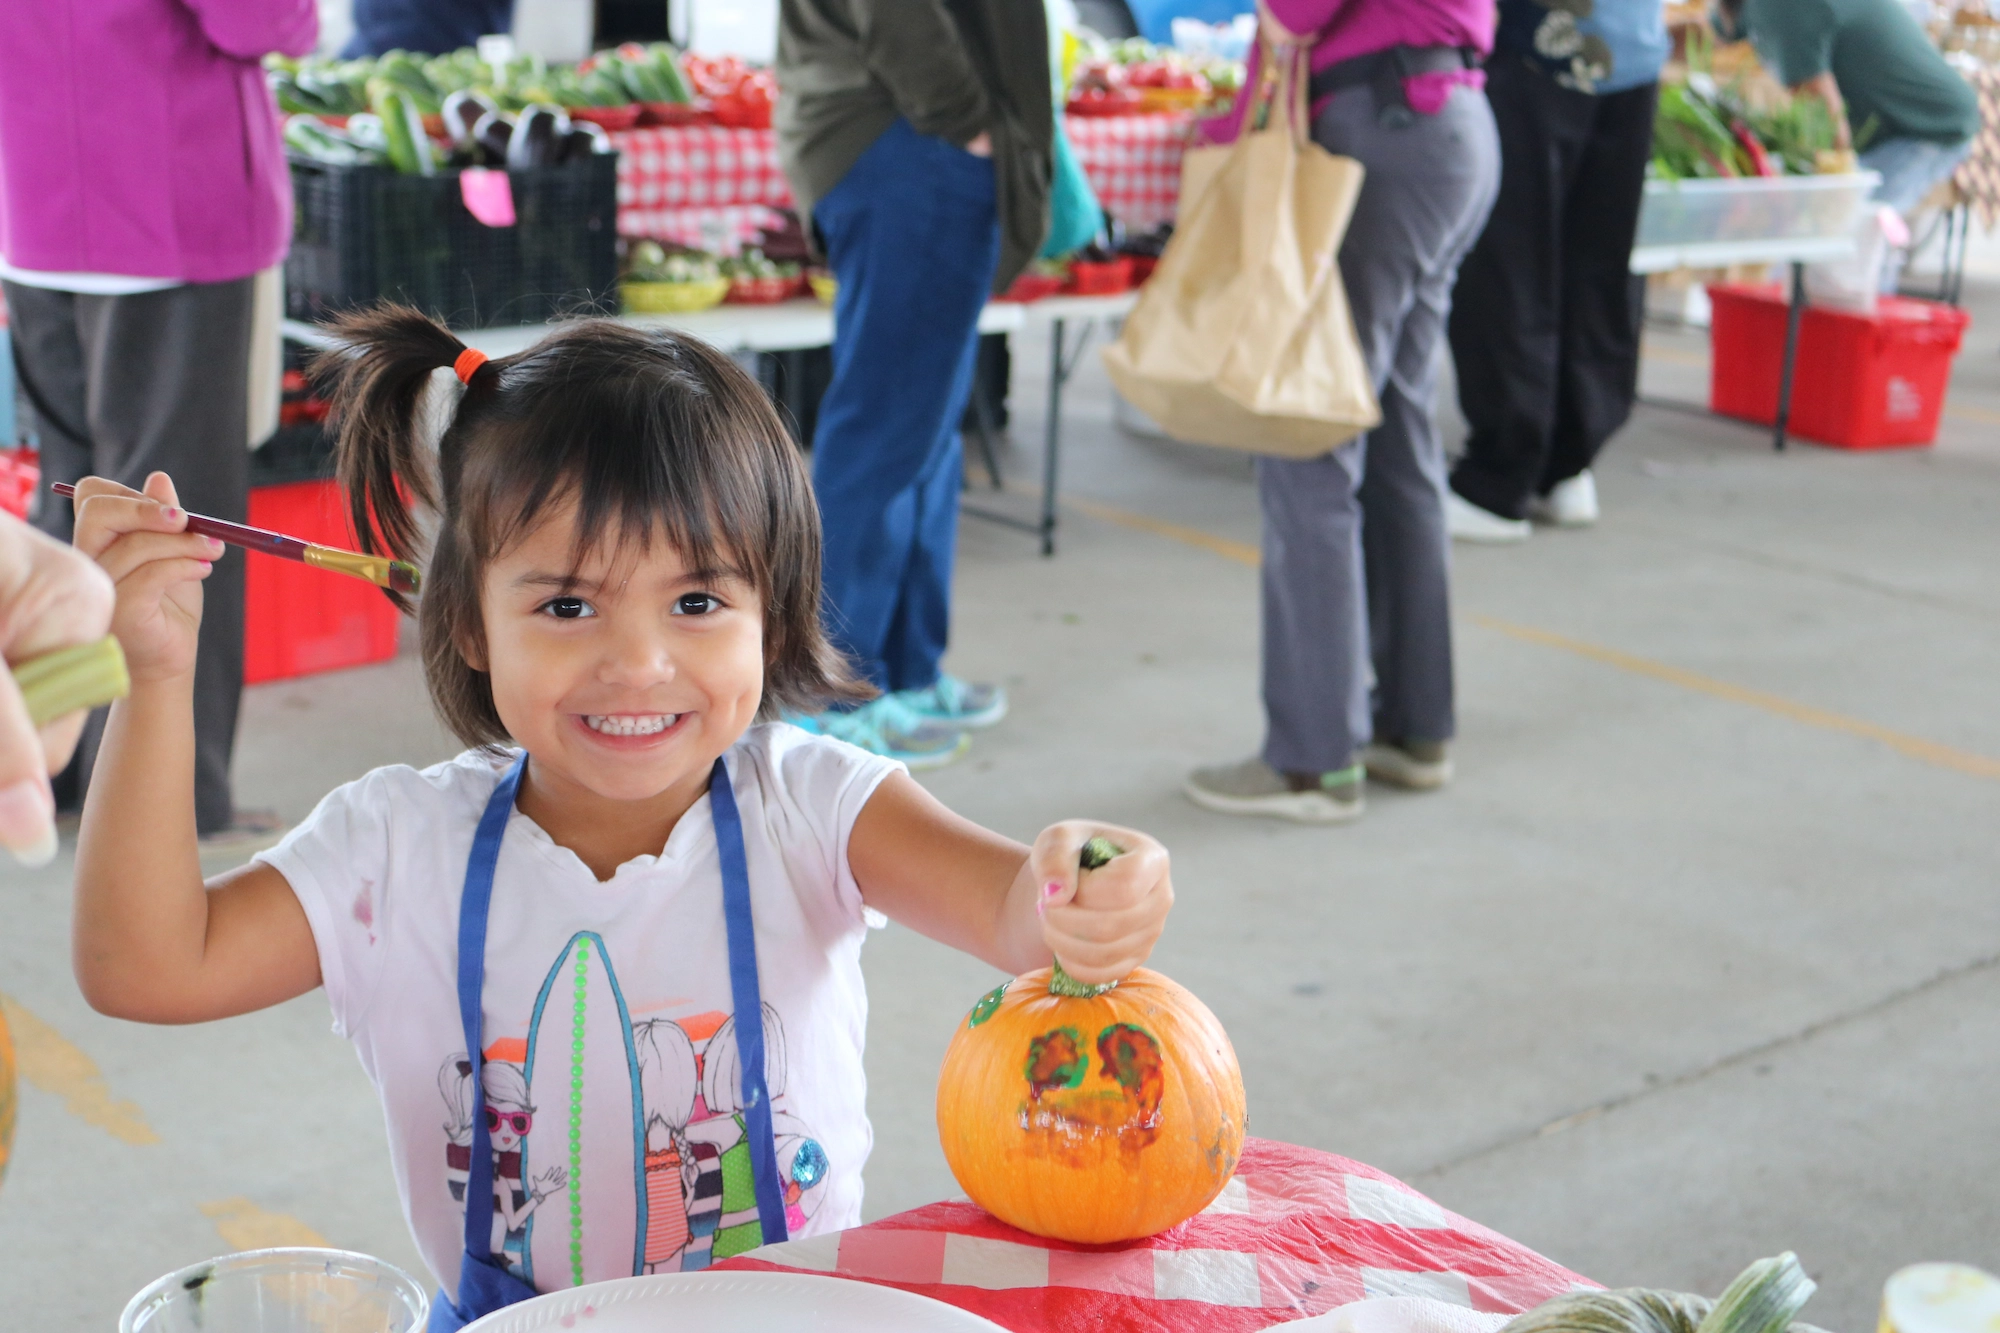 A grinning child presents her painted pumpkin for the camera at a farmers market. Shoppers can be seen in the background.